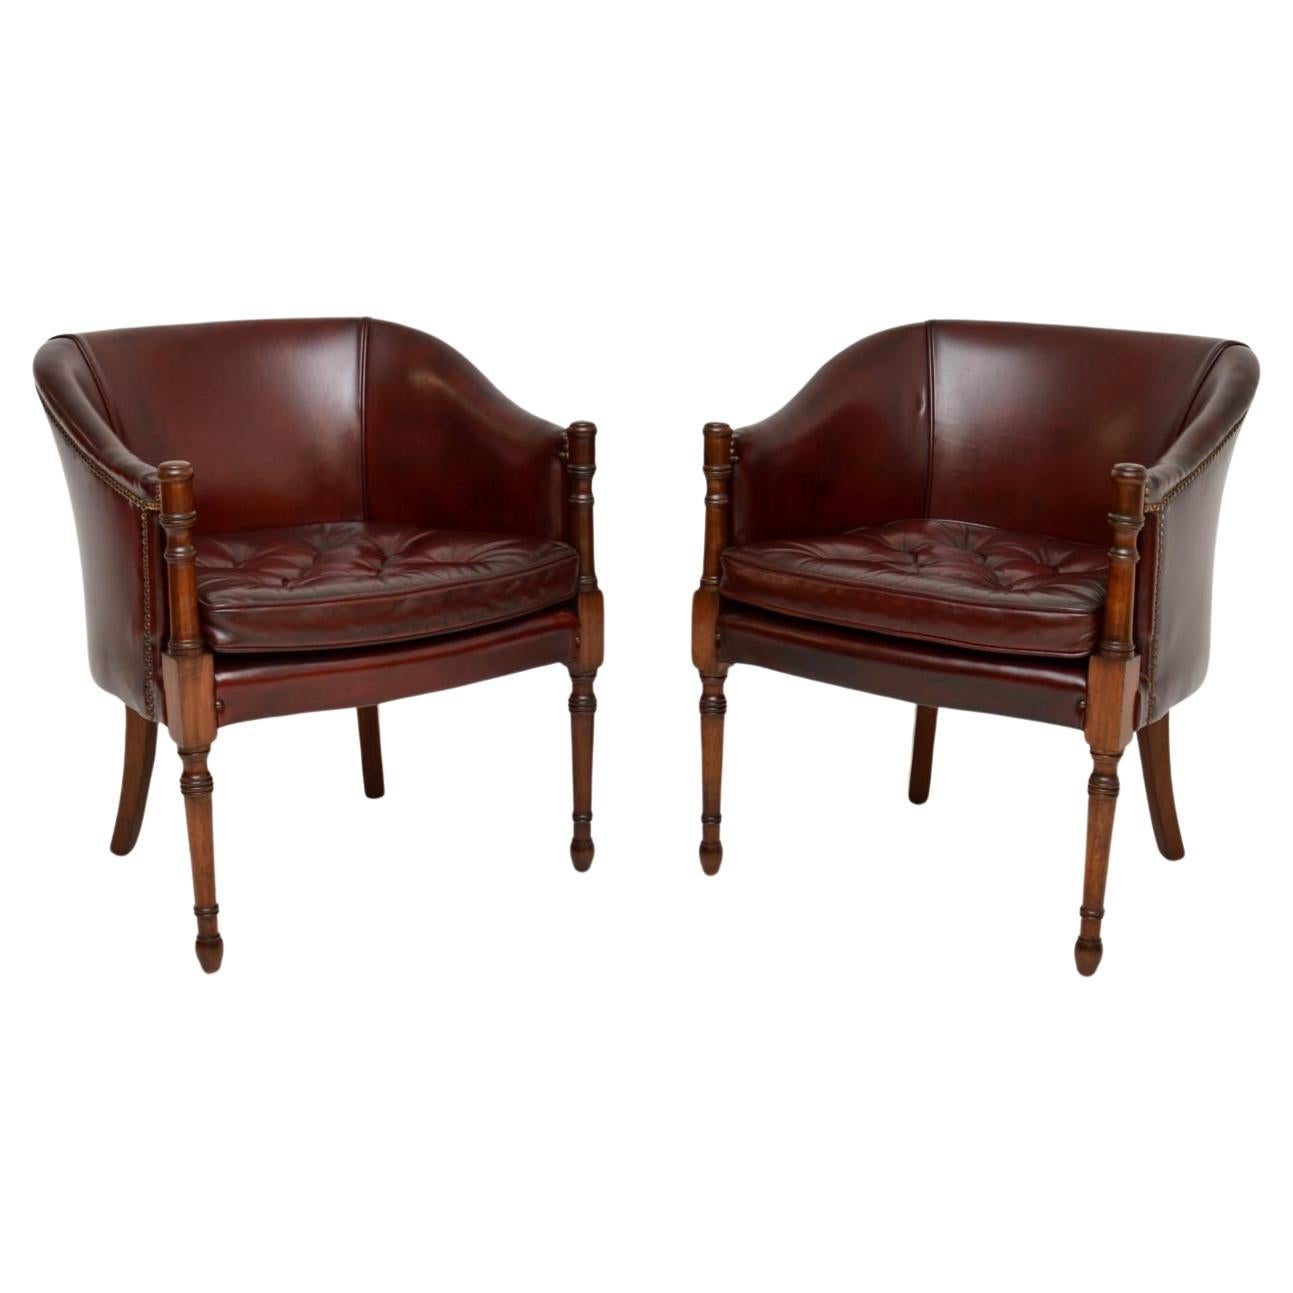 Pair of Antique Georgian Style Leather Armchairs